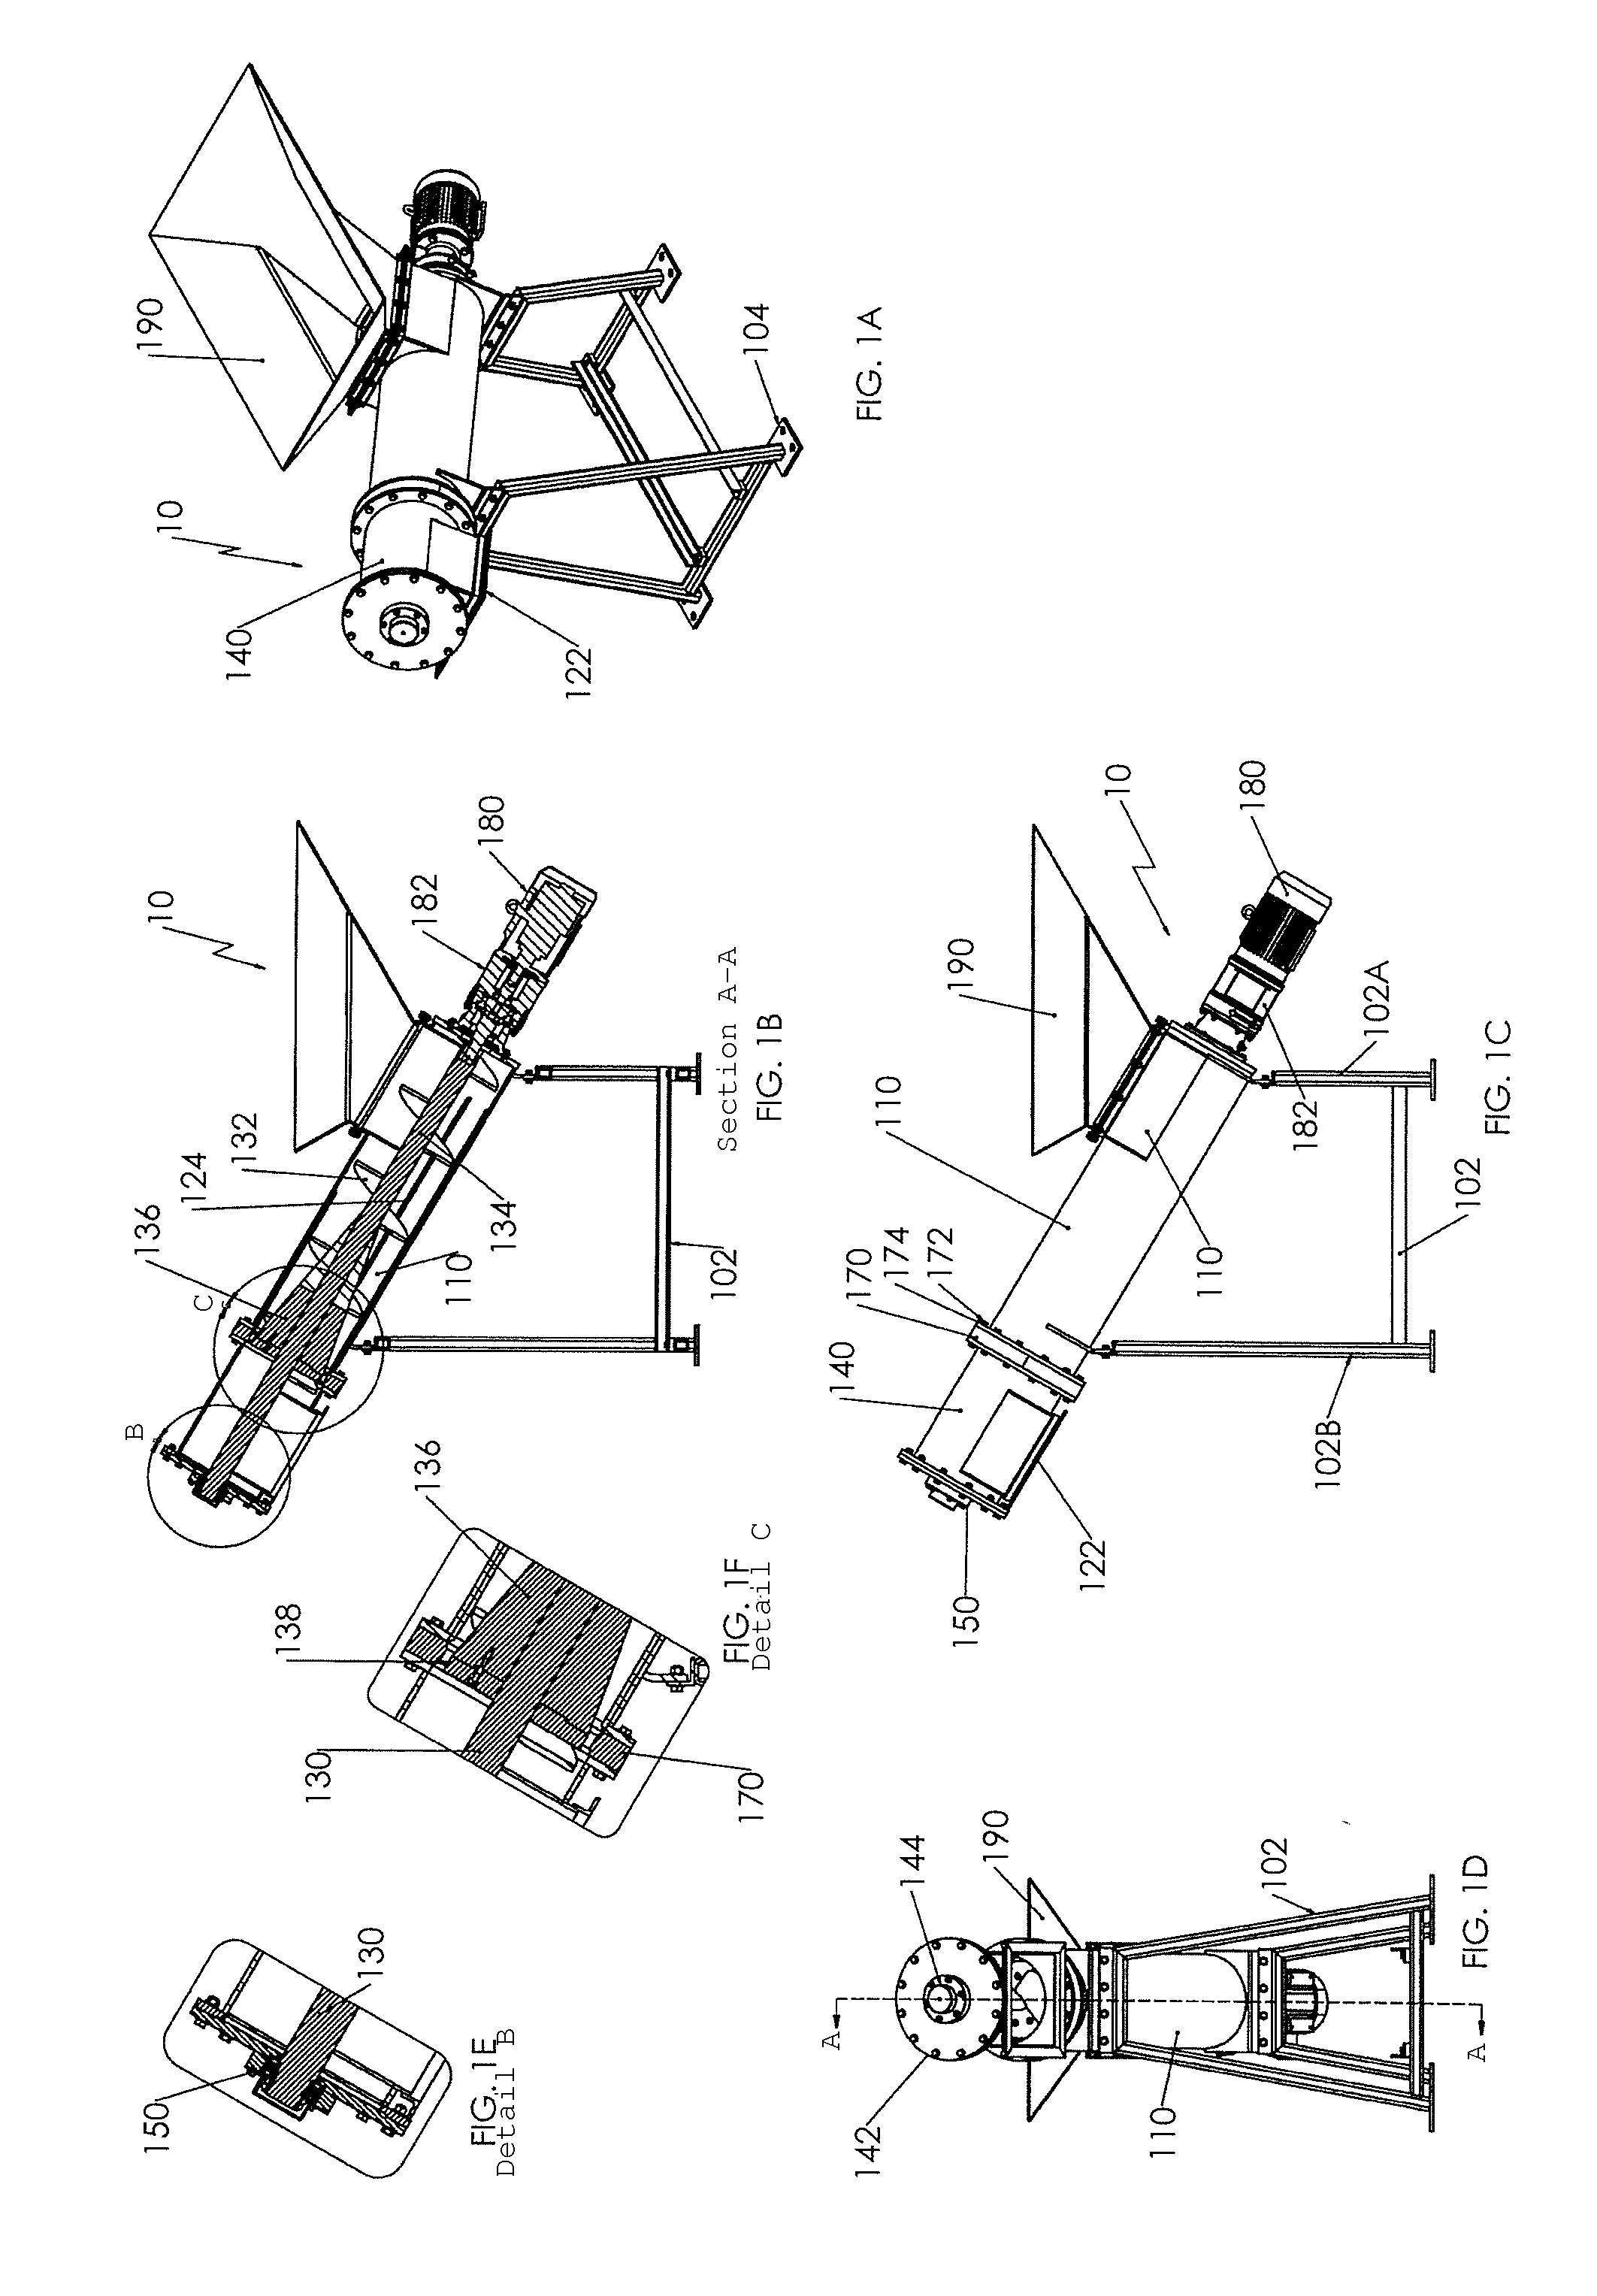 System and method for crushing